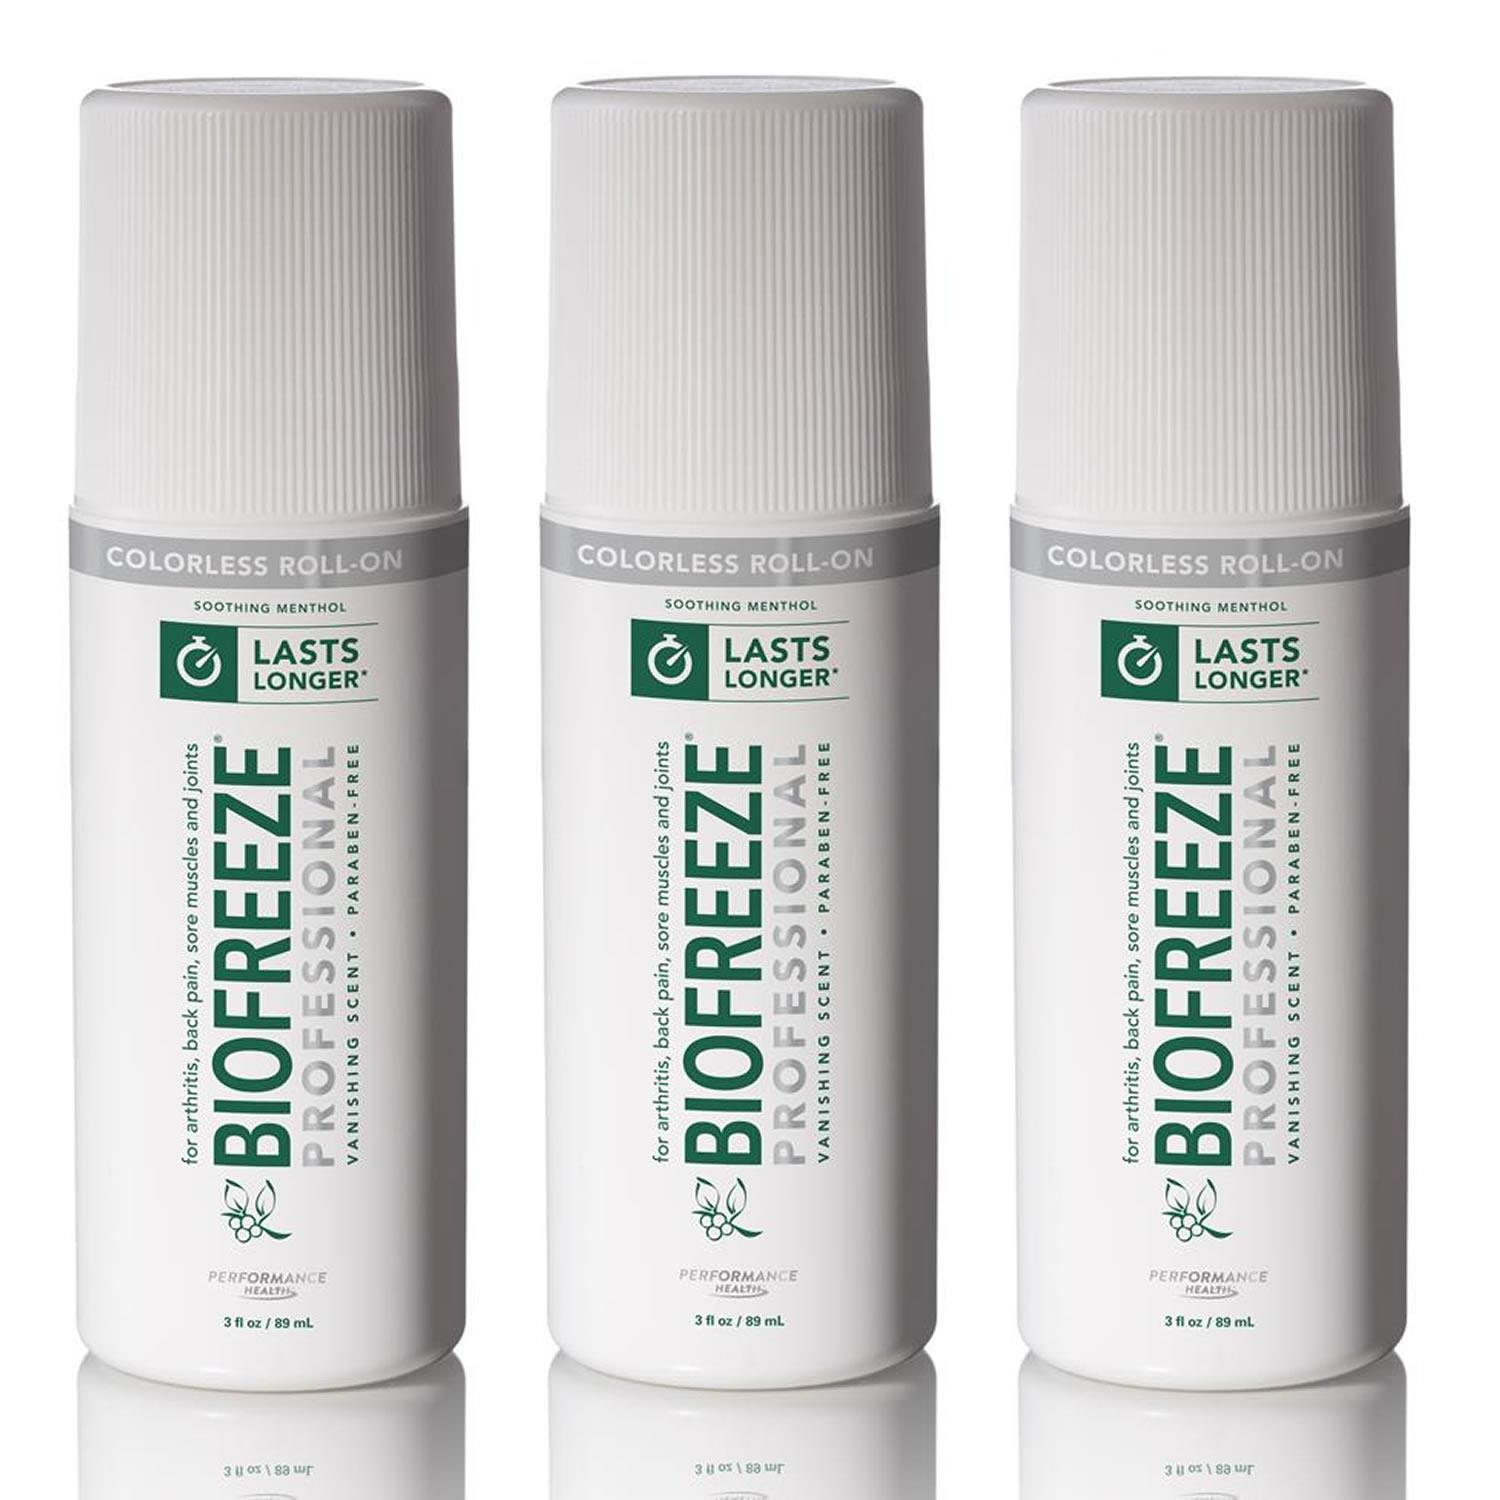 Biofreeze Biofreeze Professional Colorless 3oz Roll-On 3PK Pain Relief Arthritis Fast-Acting - image 1 of 2